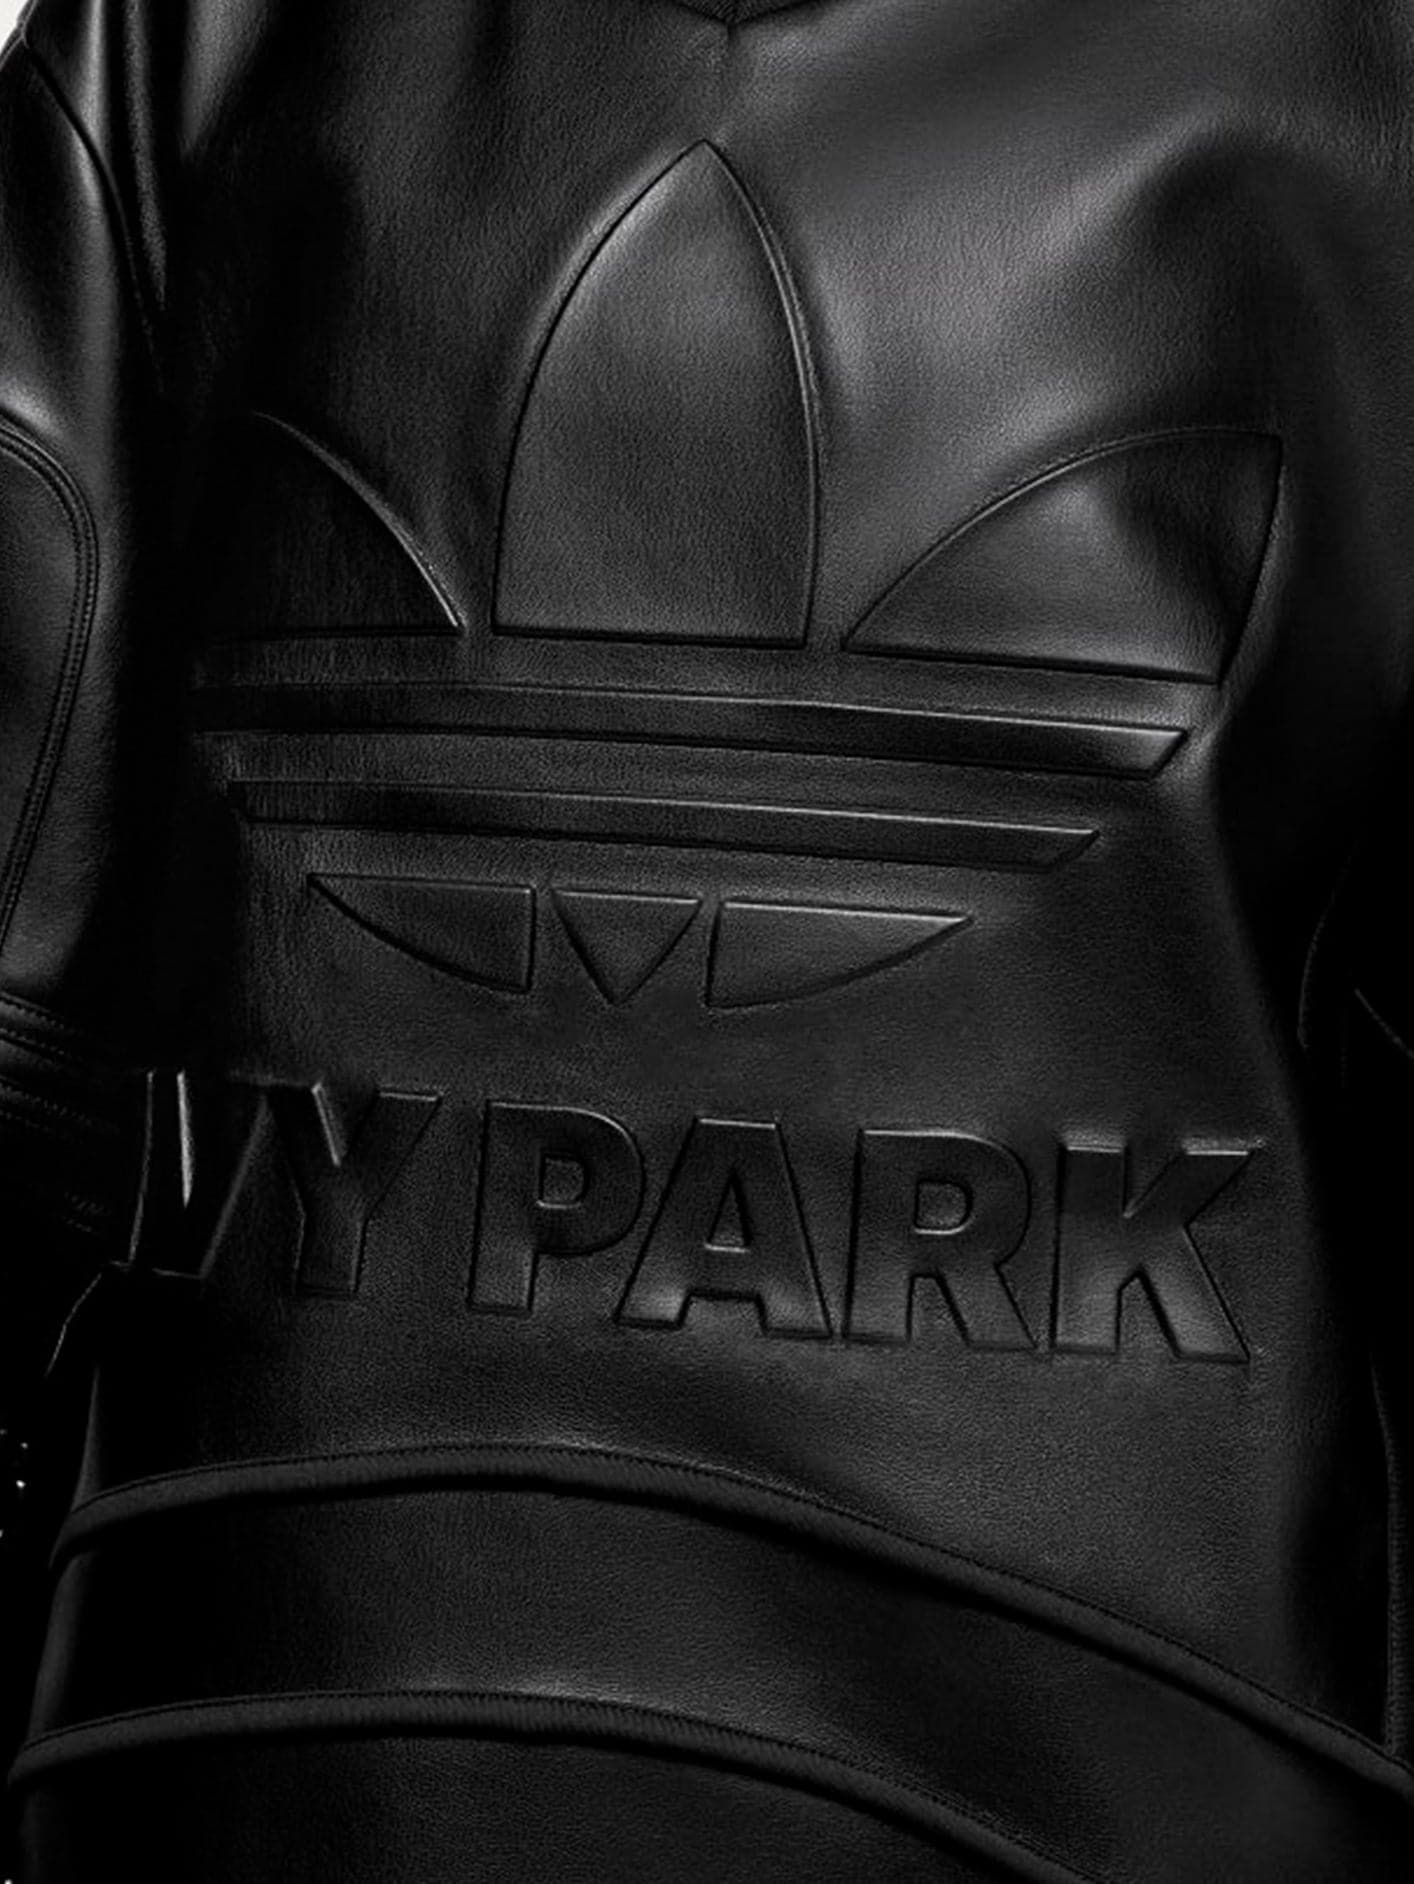 ADIDAS x IVY PARK FW23 Available Now - Introducing Ivy Park Noir